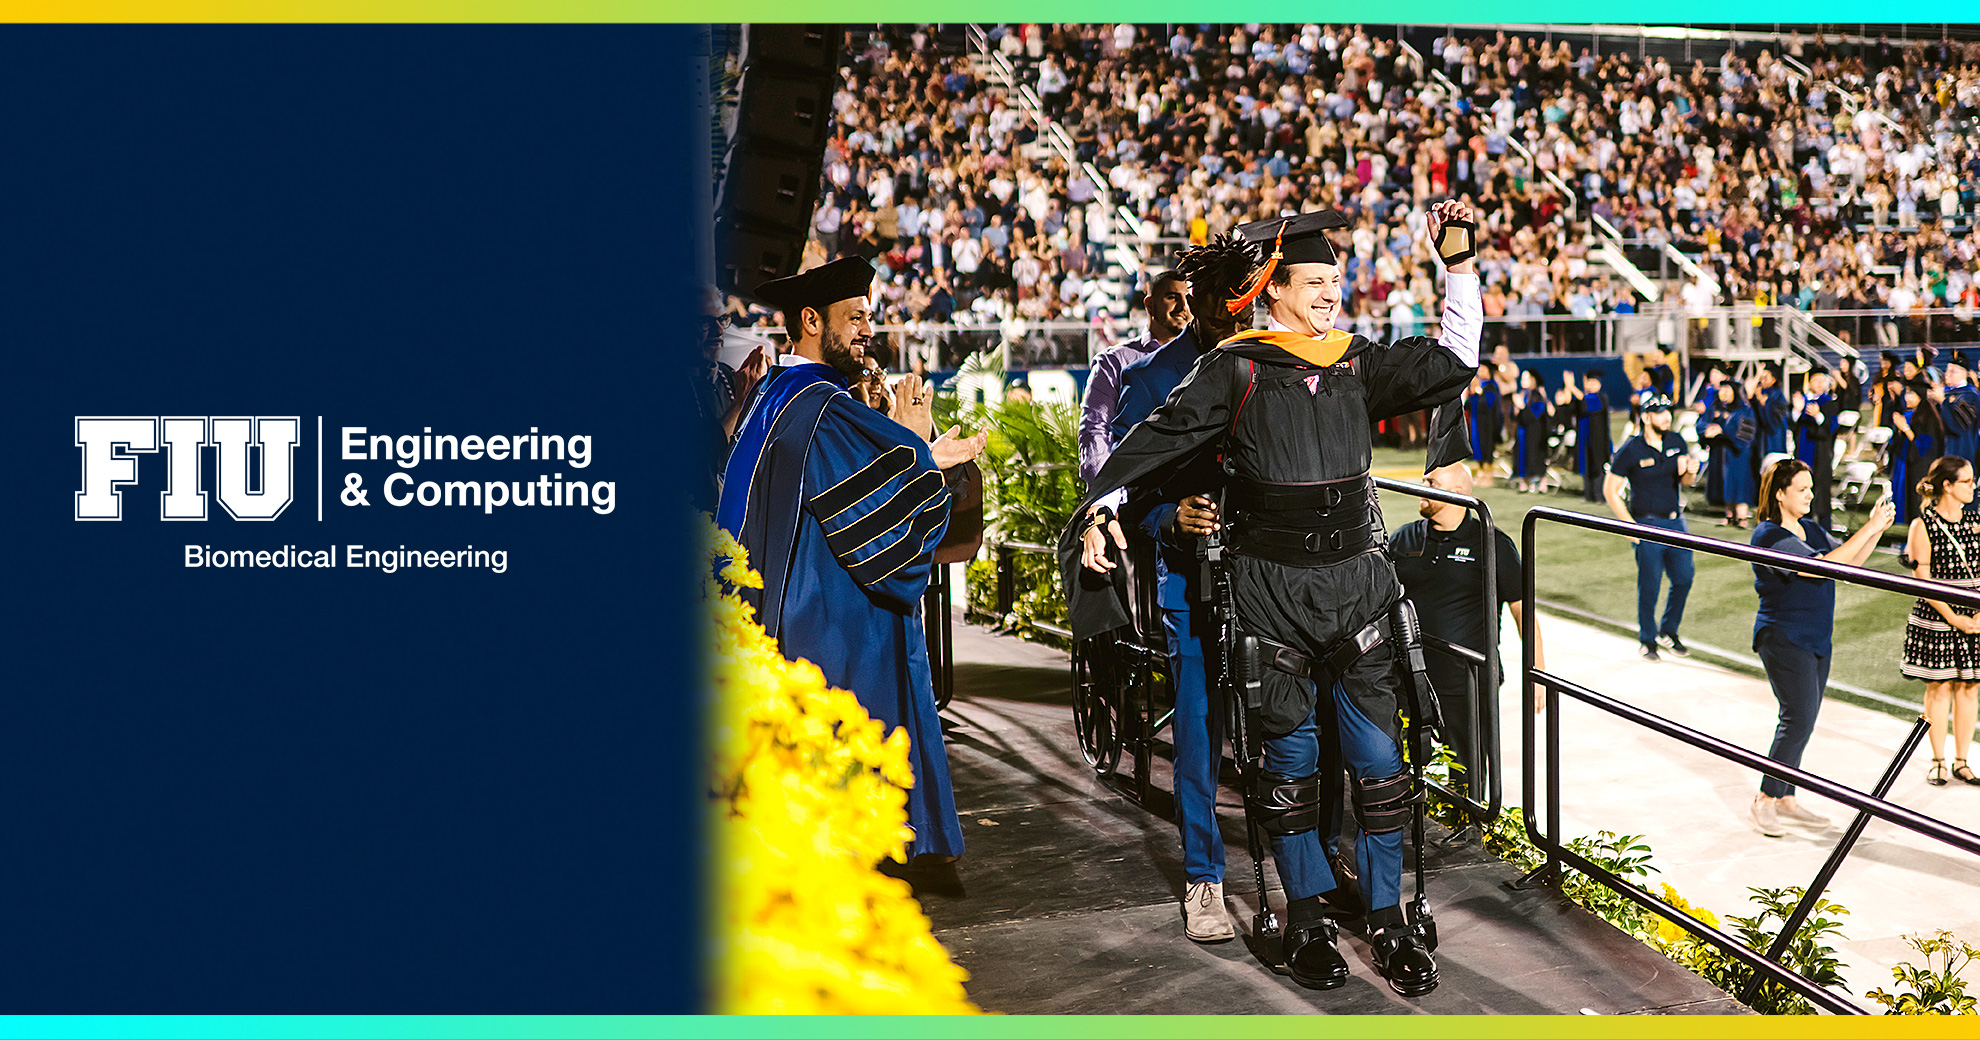 Paralyzed Biomedical Engineering Student Aldo Amenta Walks Across Stage For His Master’s